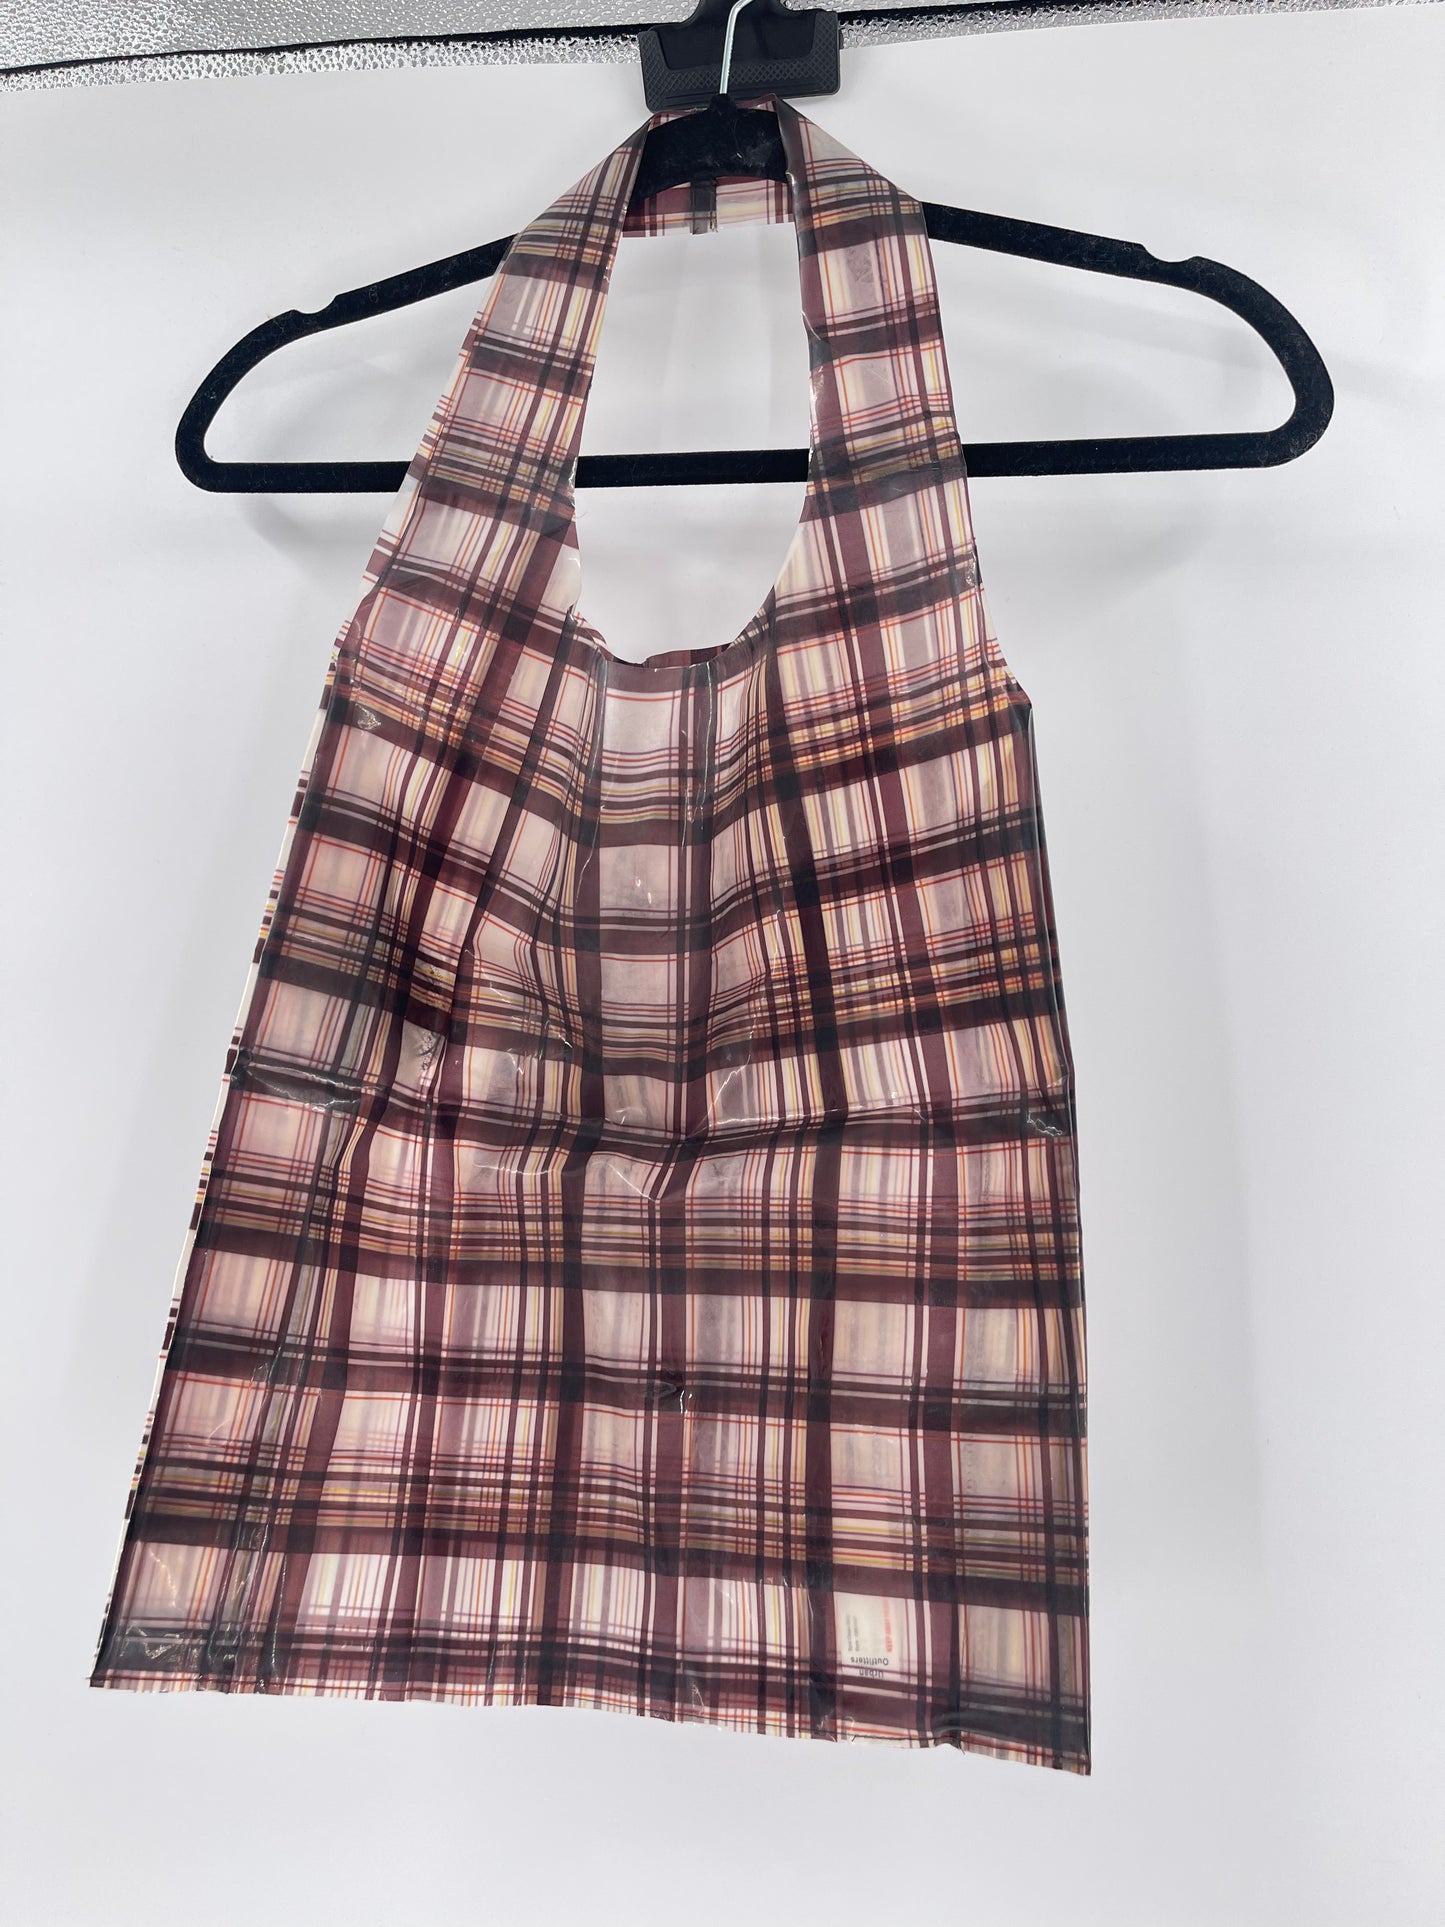 Urban Outfitters plastic plaid tote bag